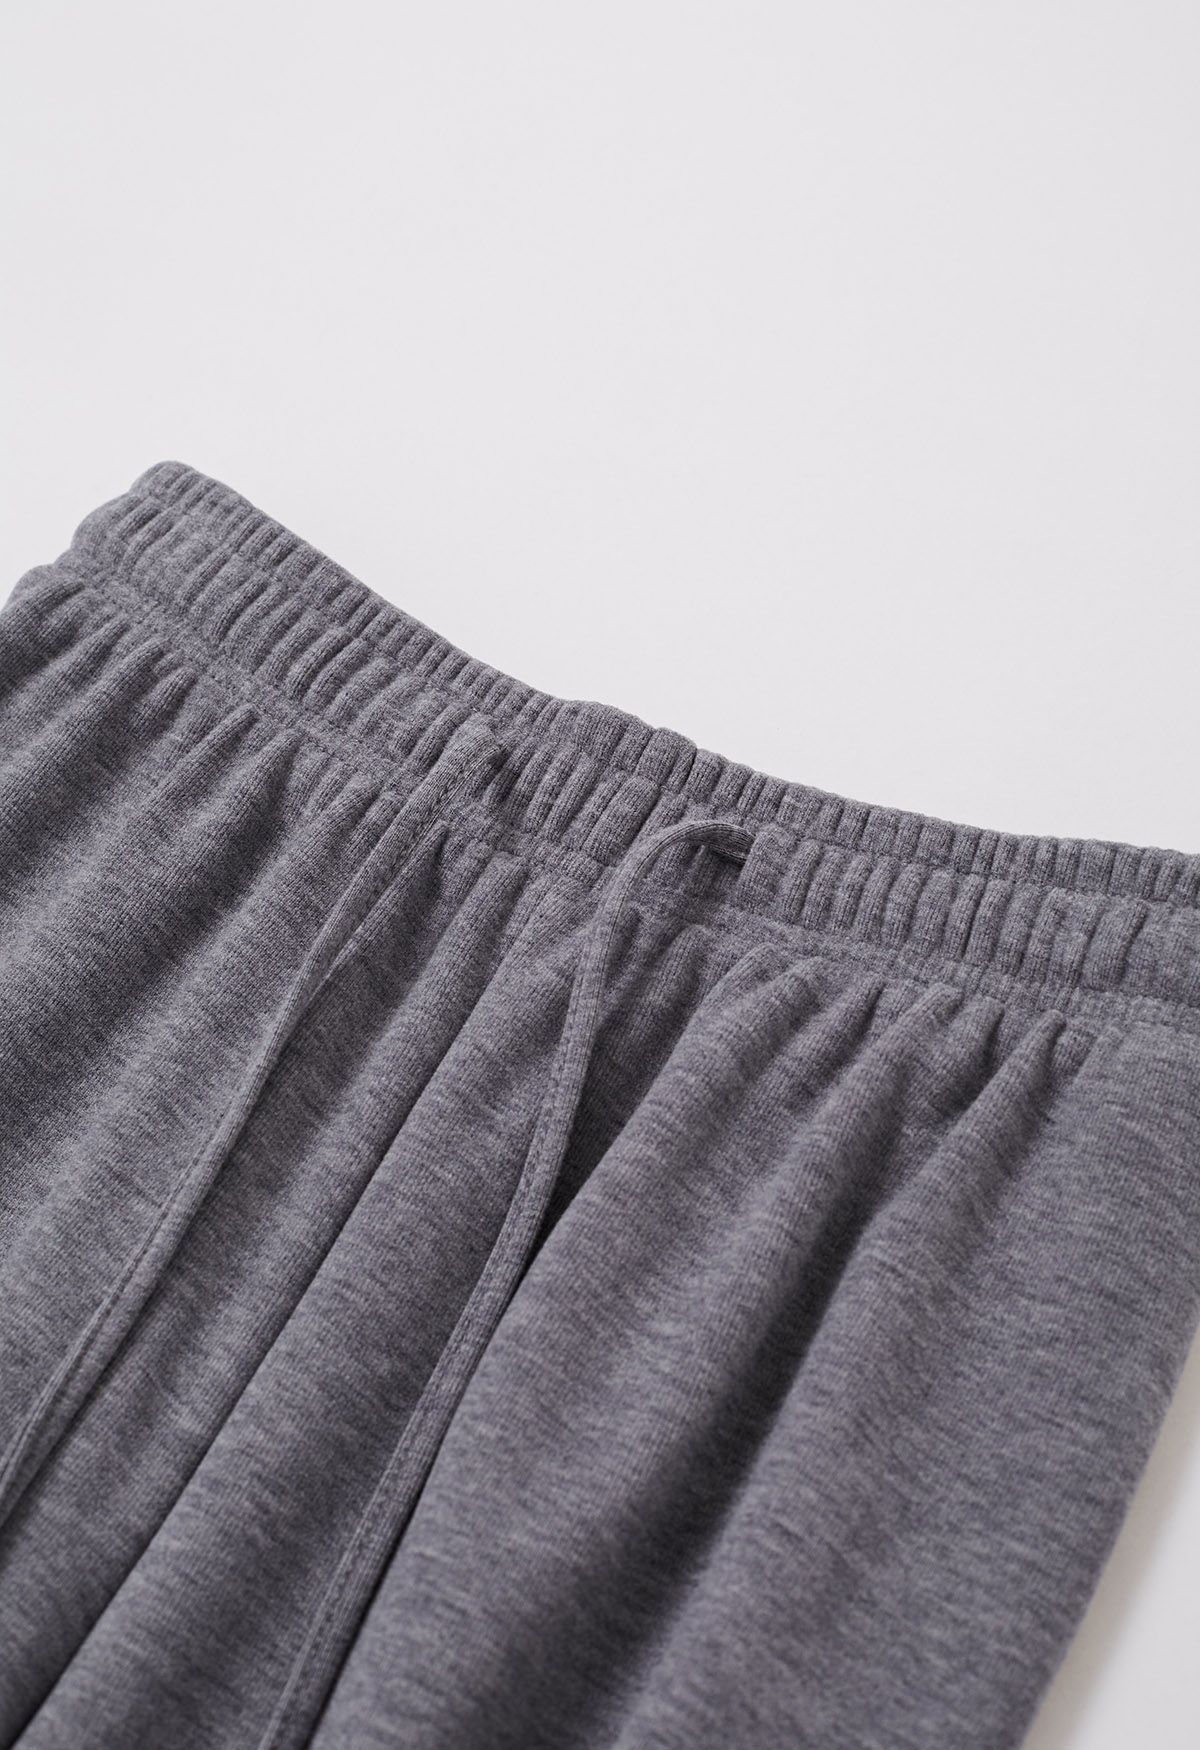 Velvet Lining Cozy Lounge Pants in Grey - Retro, Indie and Unique Fashion